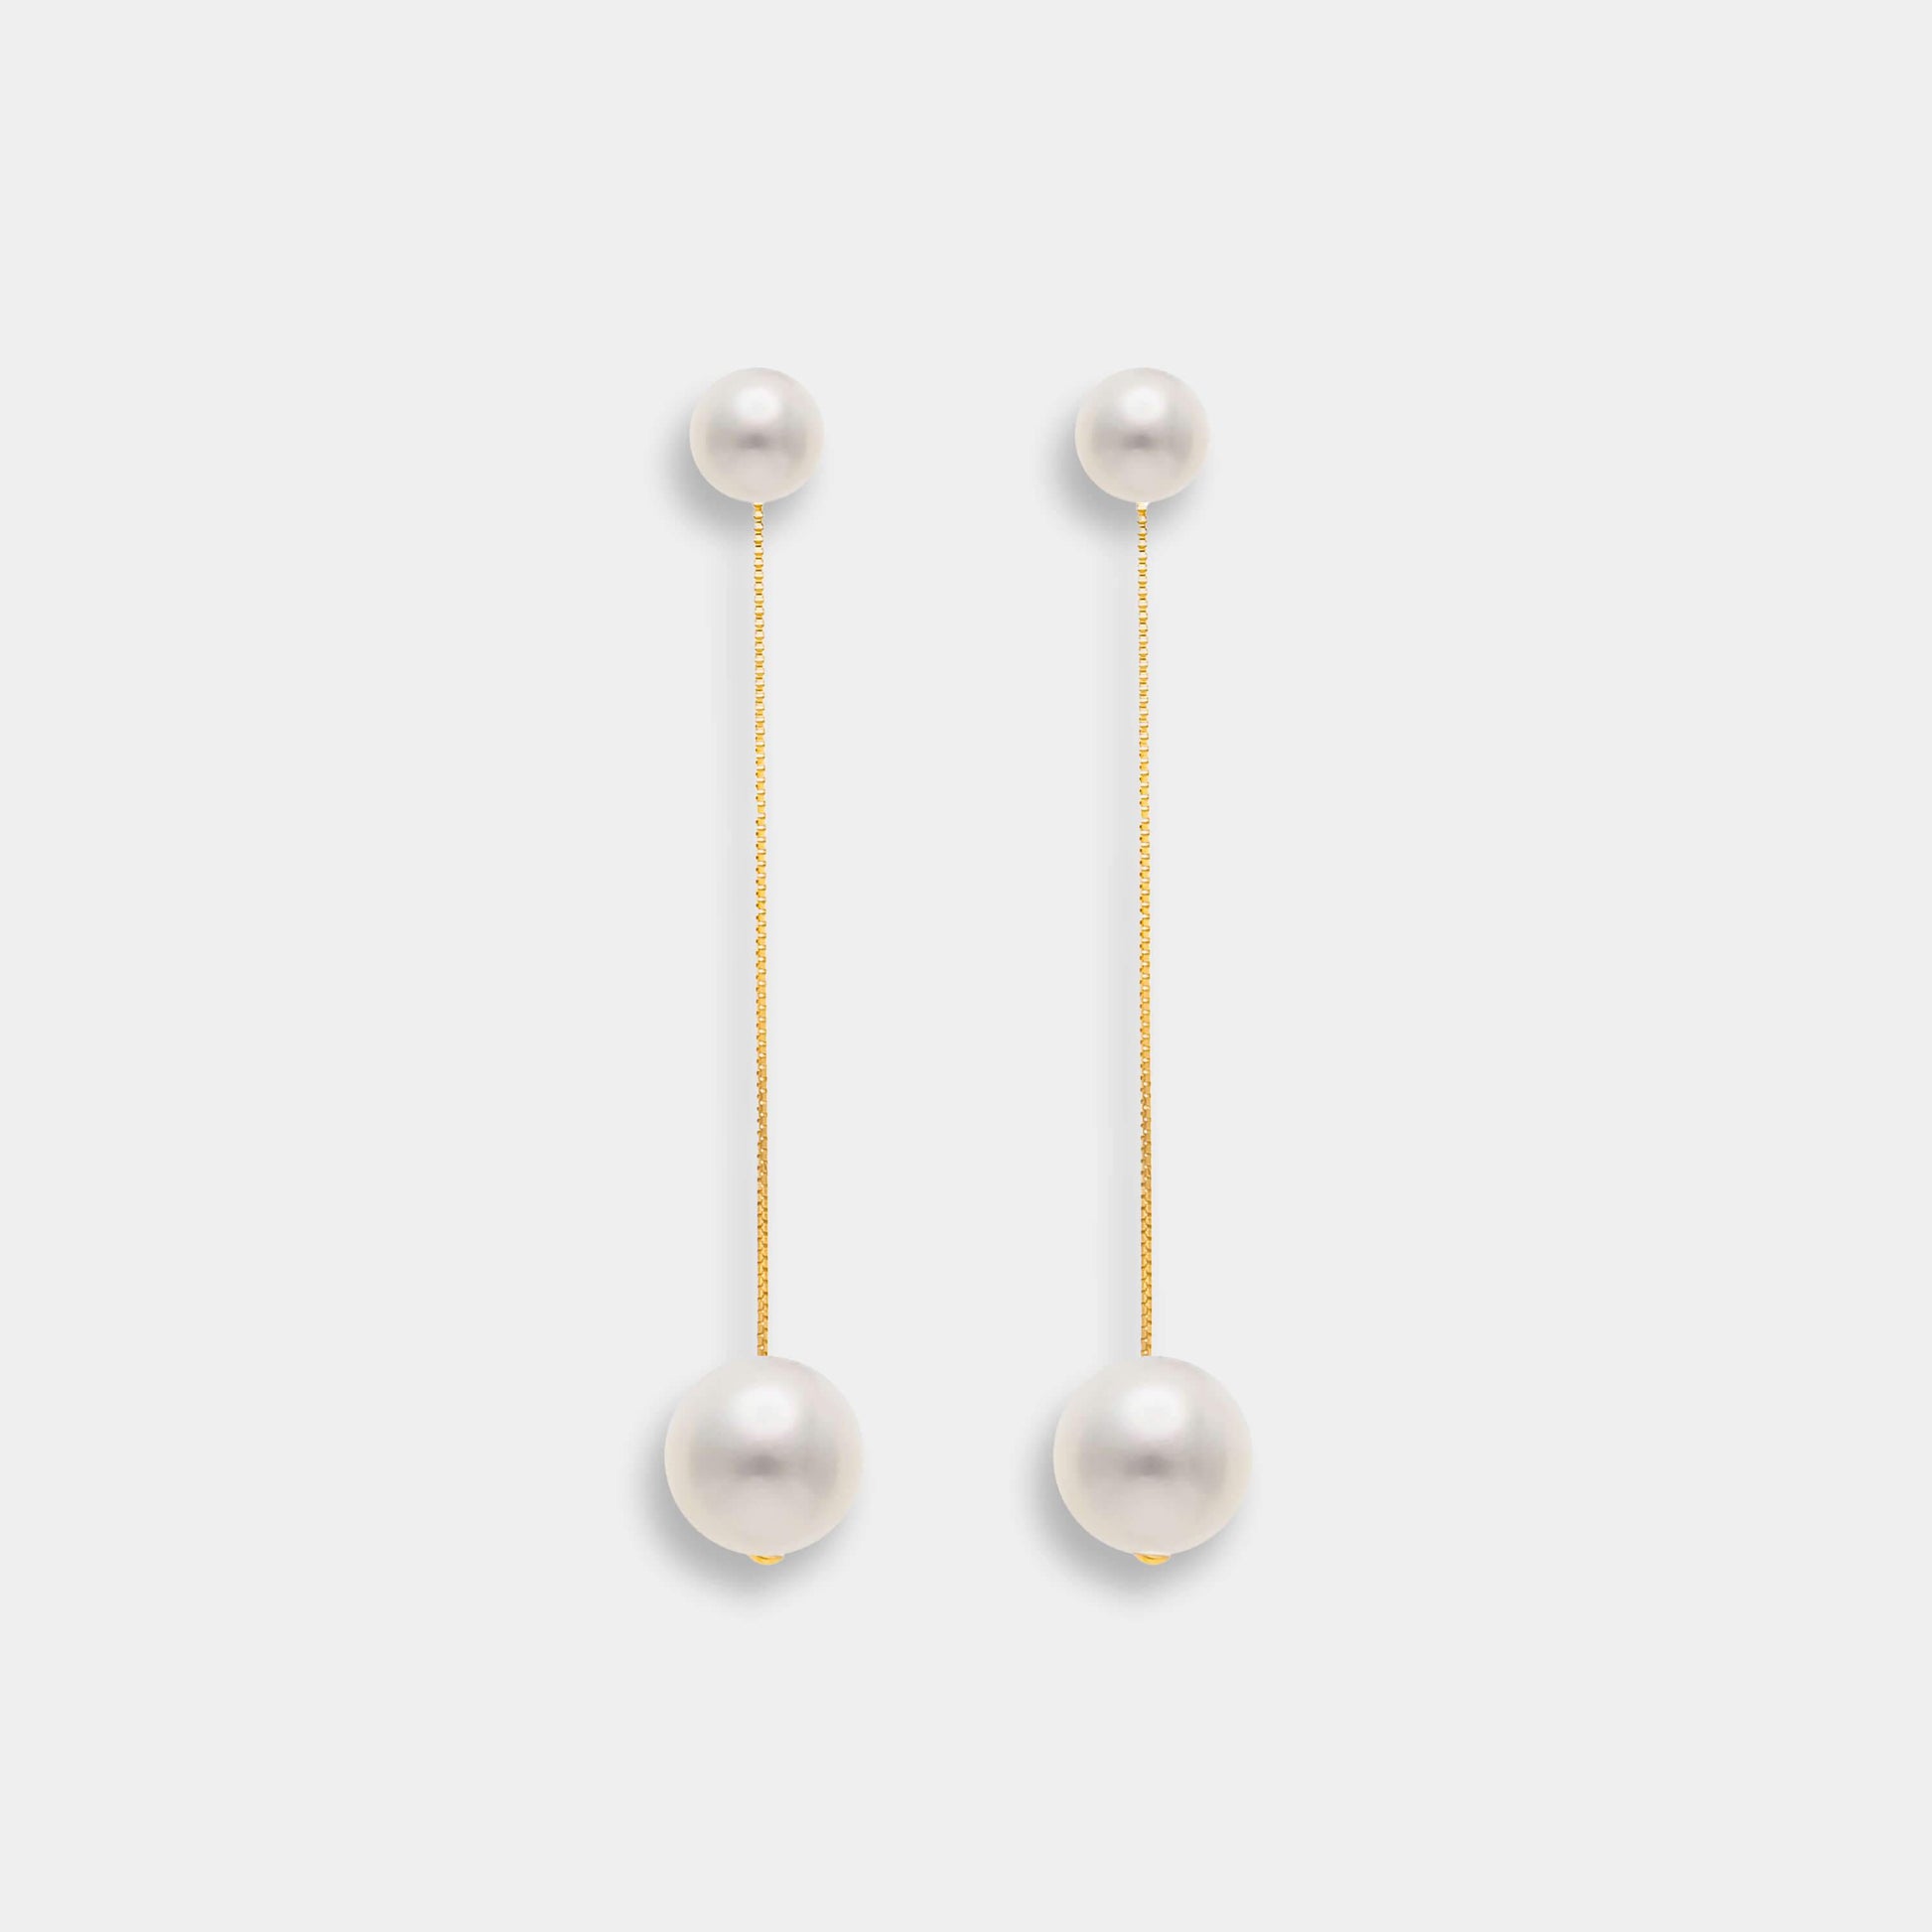 Enhance your elegance with these exquisite gold earrings featuring two pearl drops. Perfect for any occasion. Discover the Sway Pearl Piercing collection.